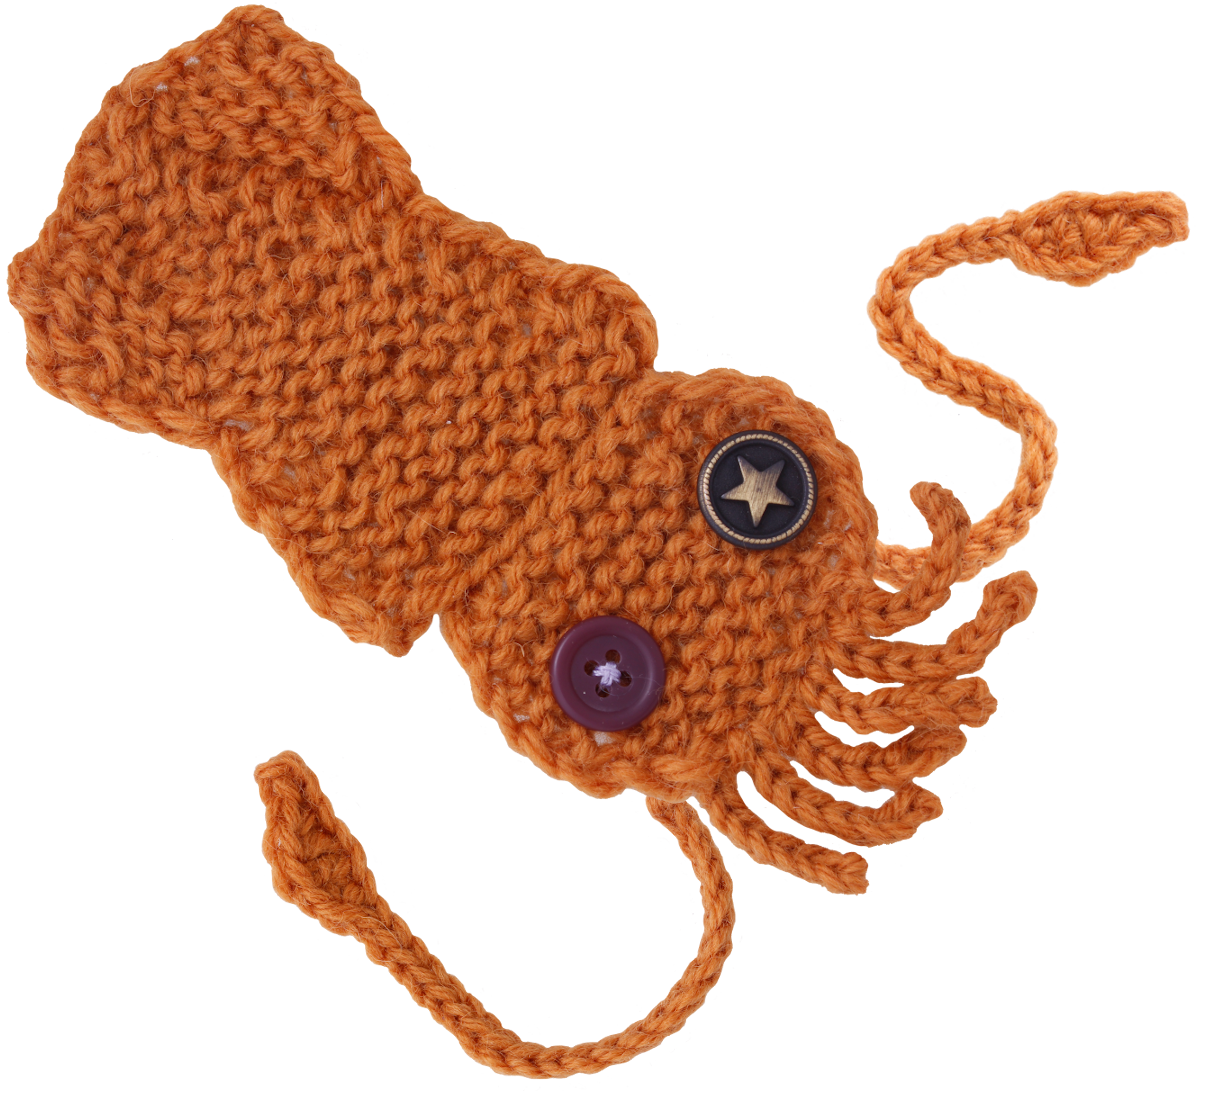 A hand-knit orange squid with mismatched button eyes